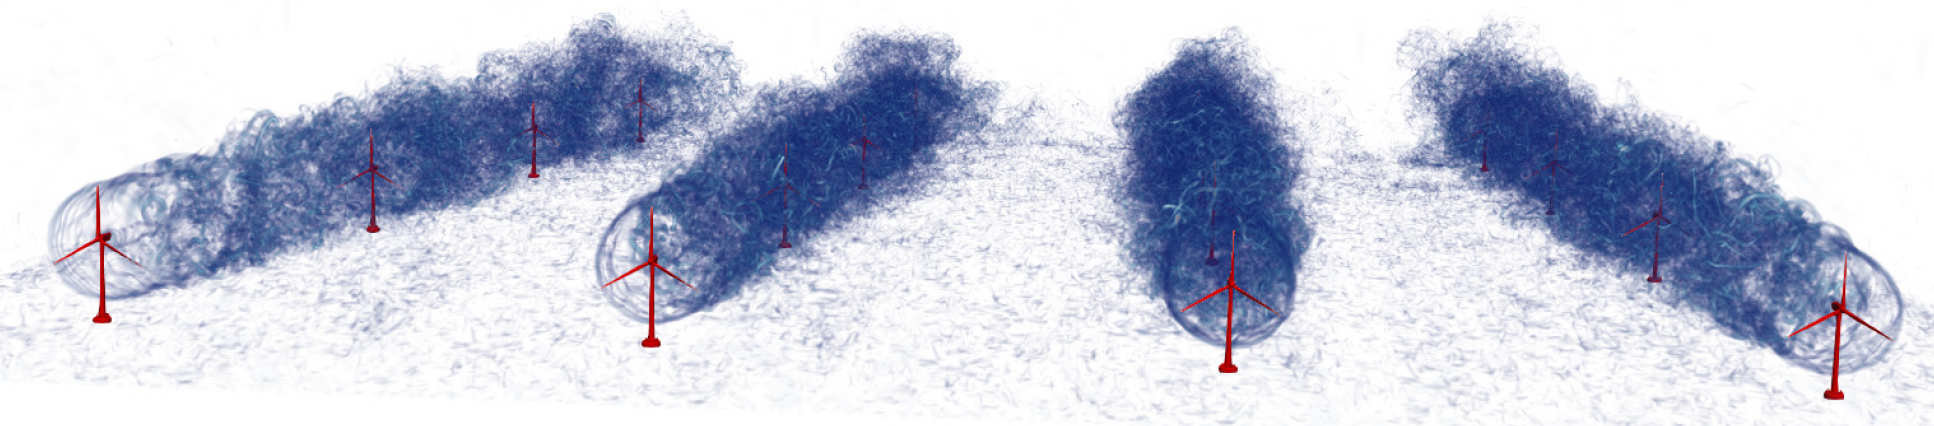 Simulated image of turbulence in wind farms